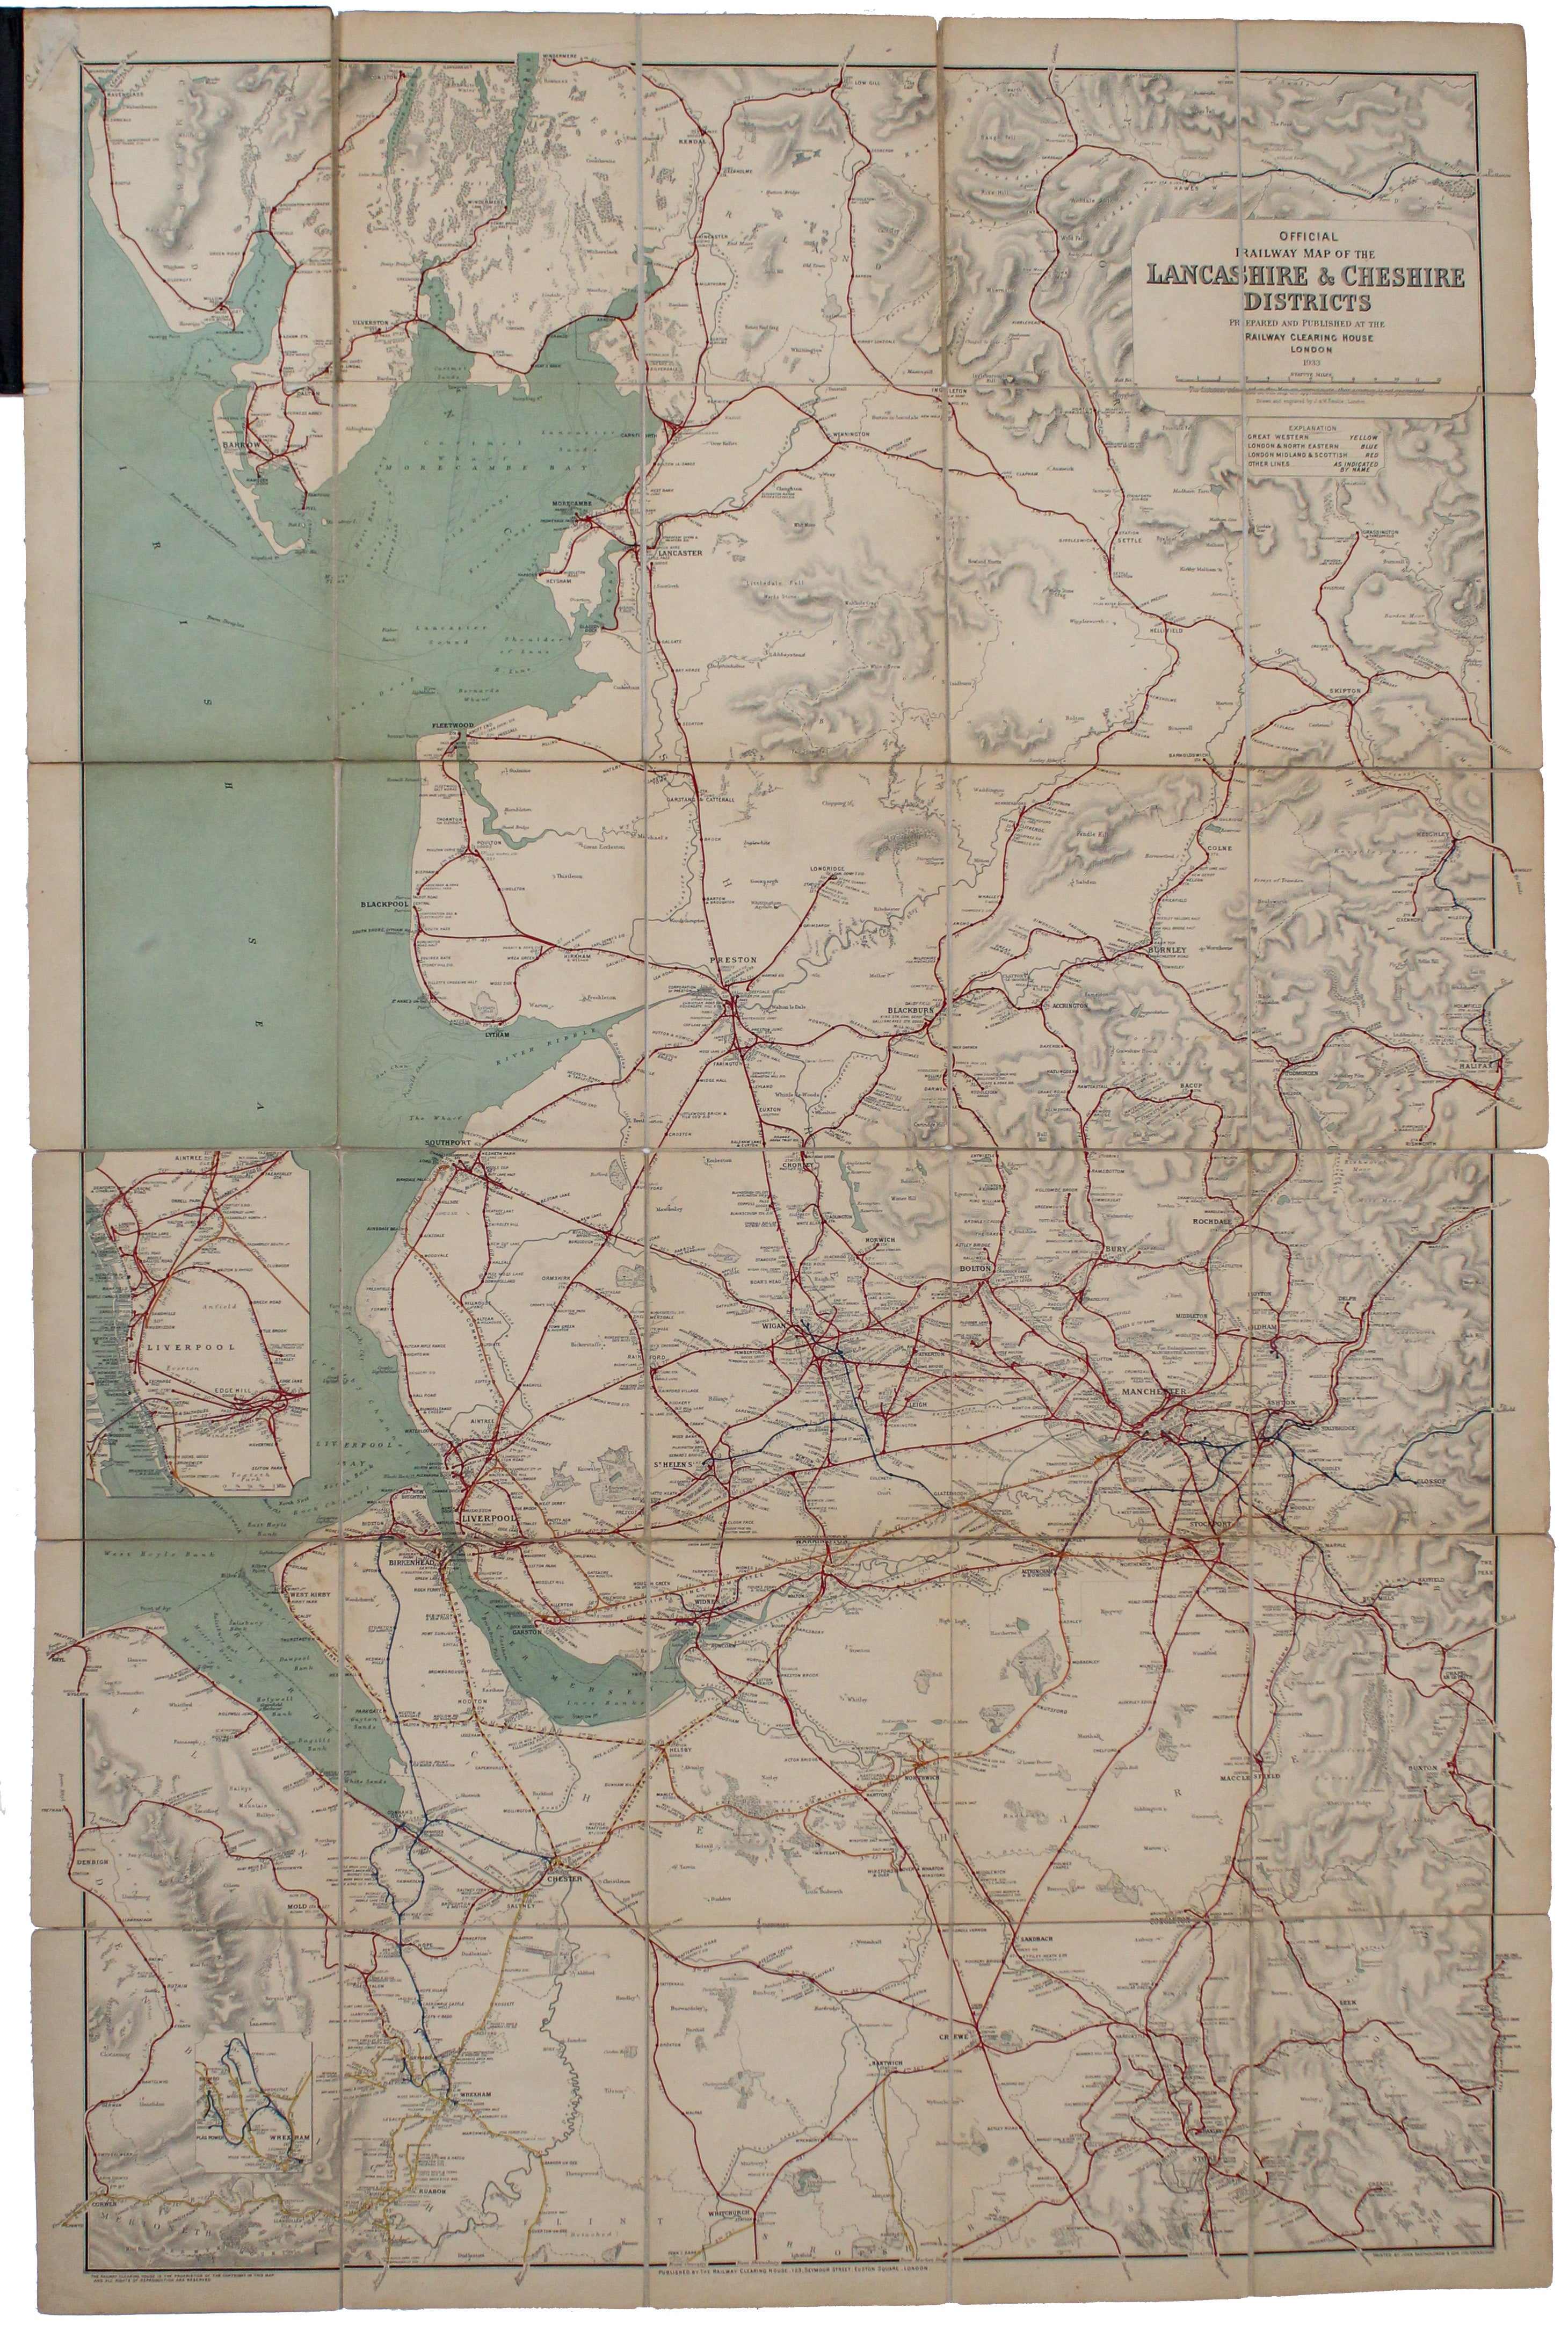 Railway Clearing House Map of Lancashire